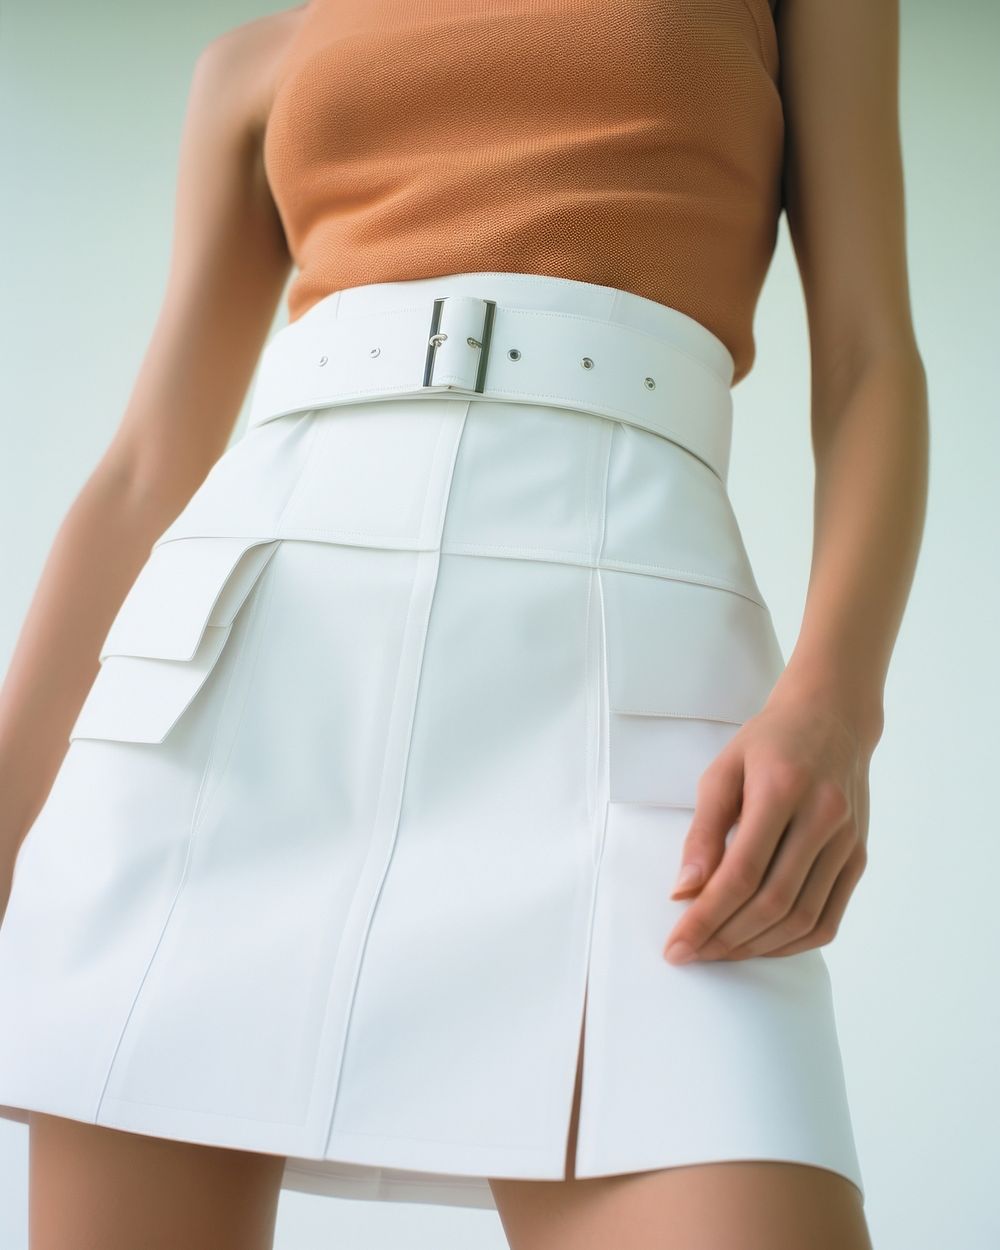 Super close up only bottom part of white skort with contrast waistband miniskirt adult undergarment.